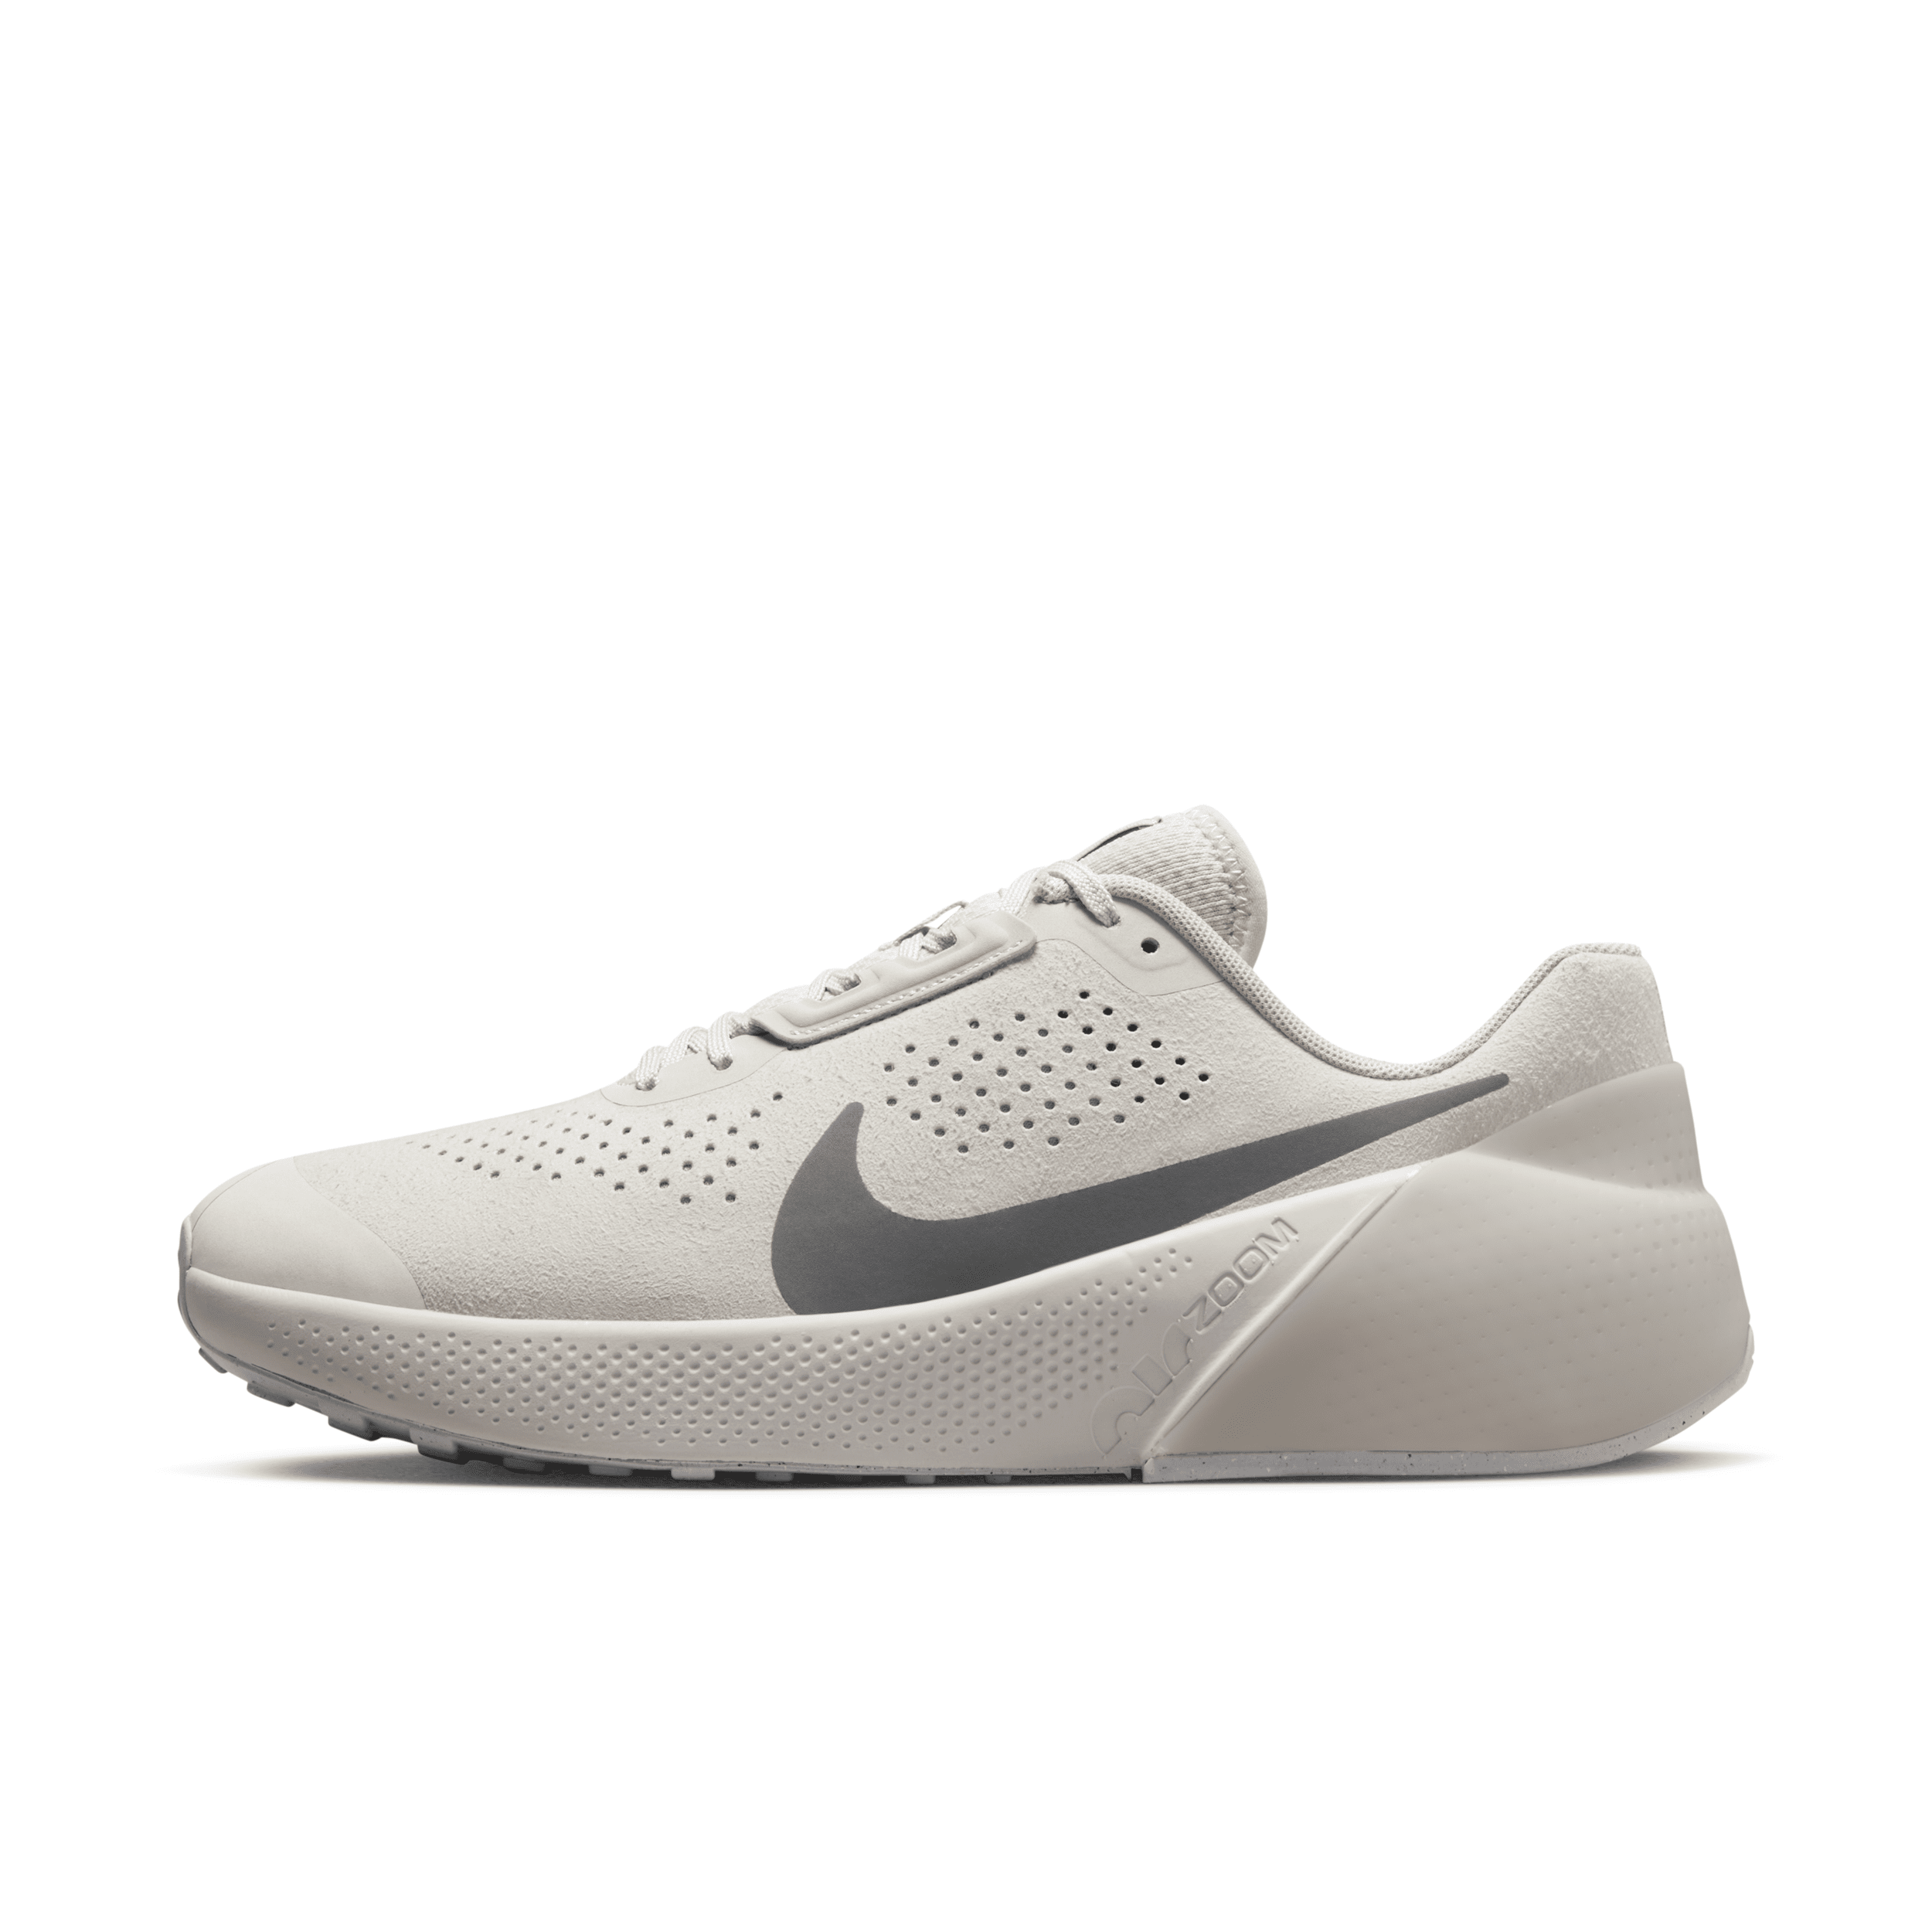 Nike Men's Air Zoom Tr 1 Workout Shoes In Grey